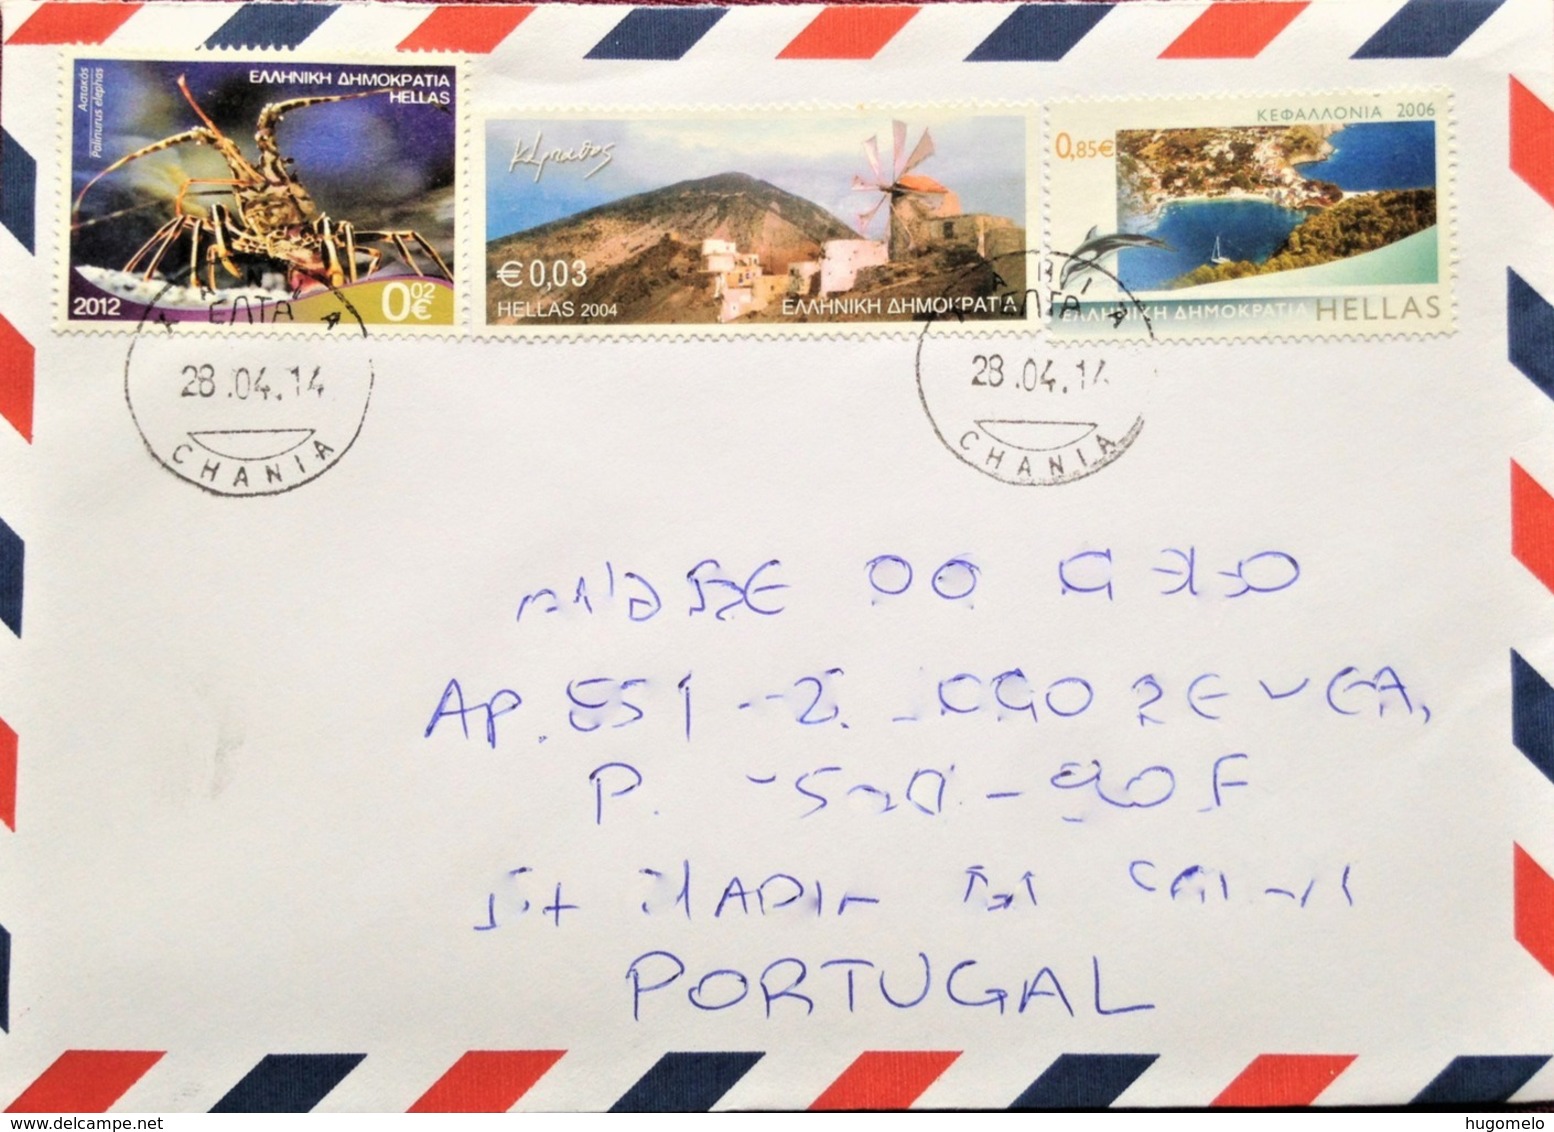 Greece, Circulated Cover To Portugal, "Windmills", "Crustaceans", "Lobsters", "Landscapes", "Kefalonia Island", 2014 - Cartas & Documentos